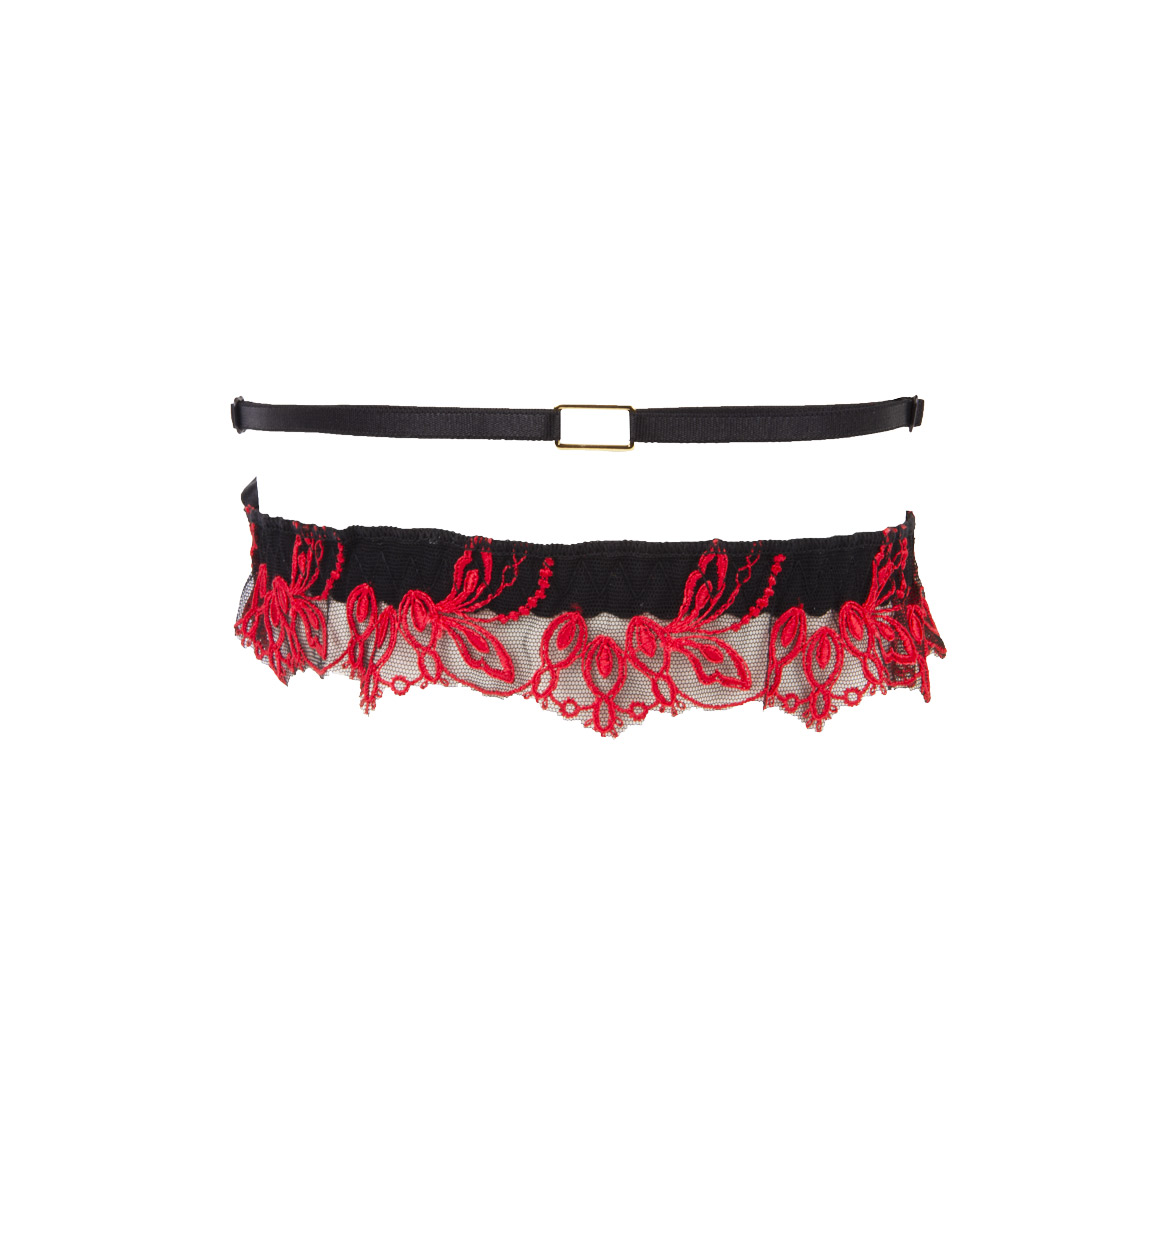 Lise-charmel-dessous-G90-Invitation Sexy-ACG5090-StrumpfBand-Sexy Flash-Front